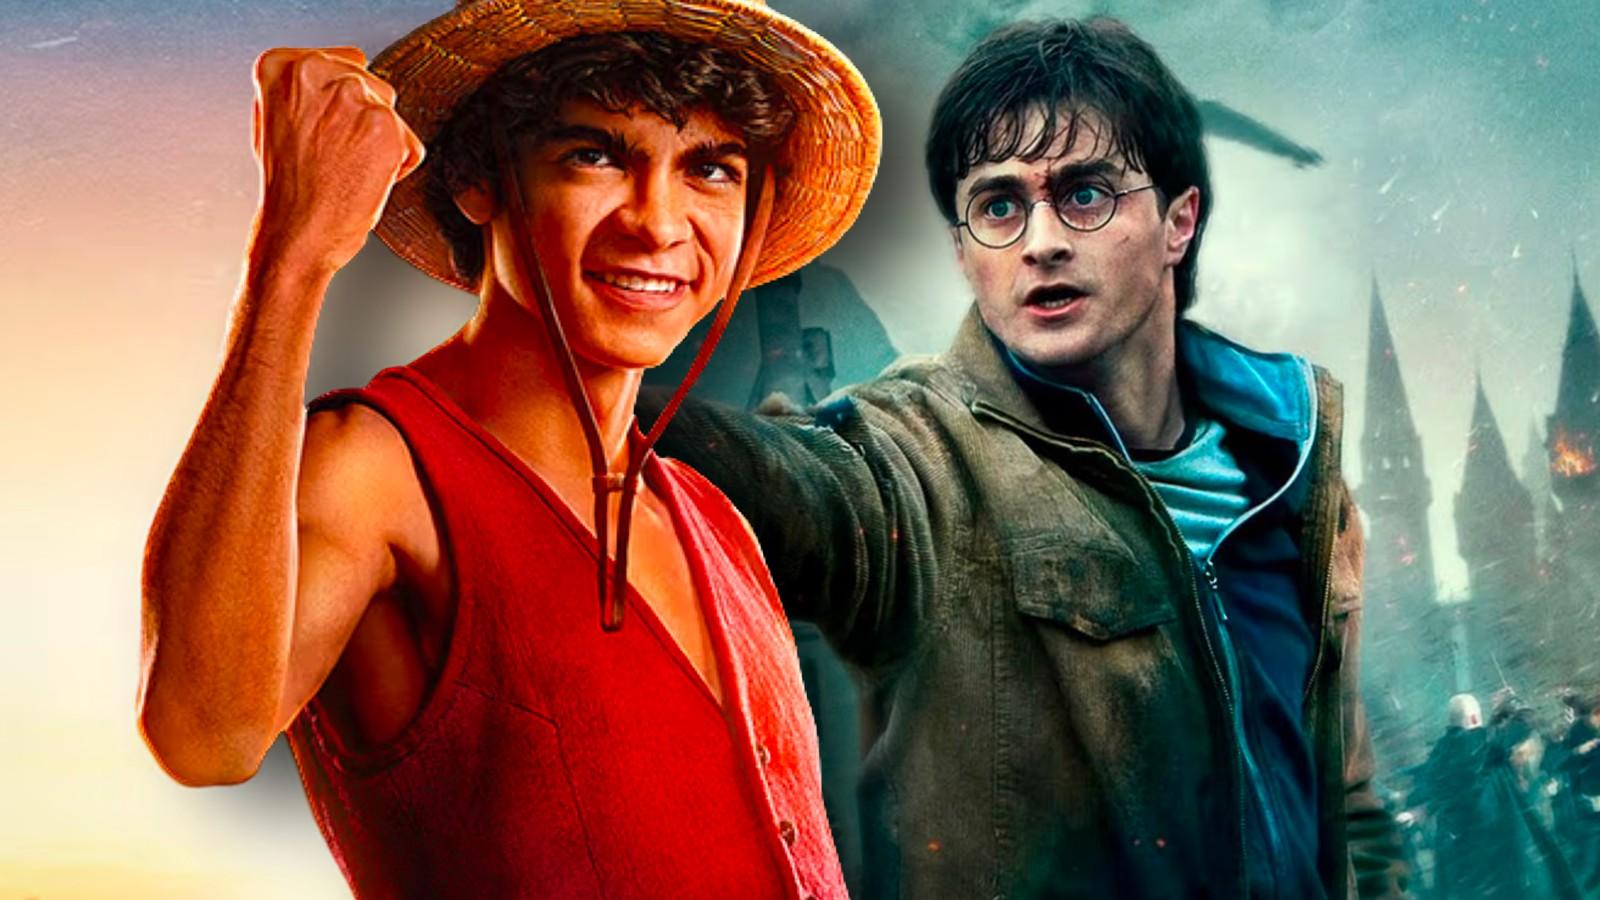 Stills from Netflix's One Piece and Harry Potter